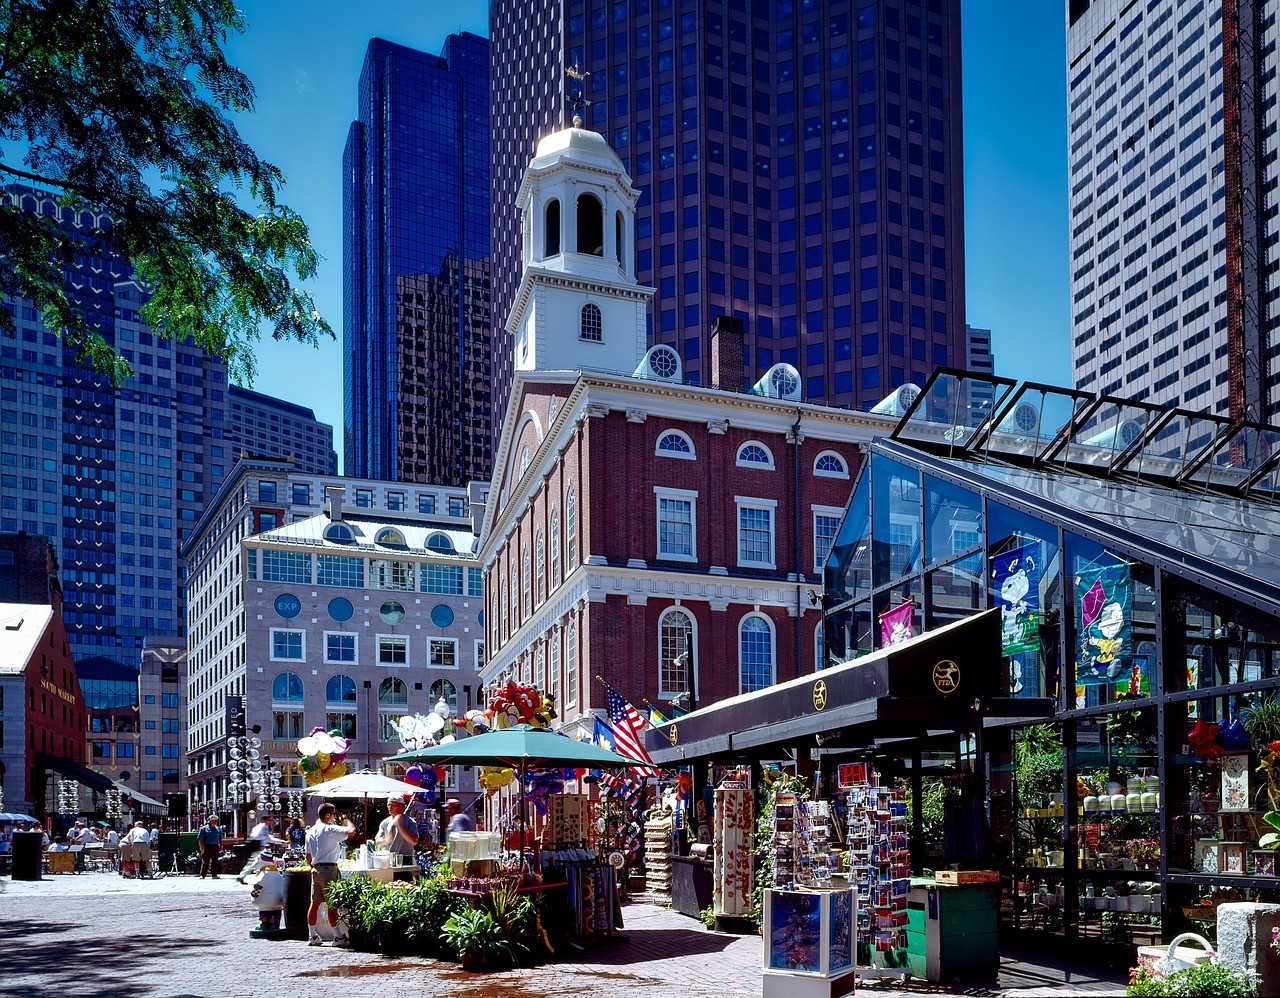 Boston Family Fun: History, Food, and Adventure in 2 Days